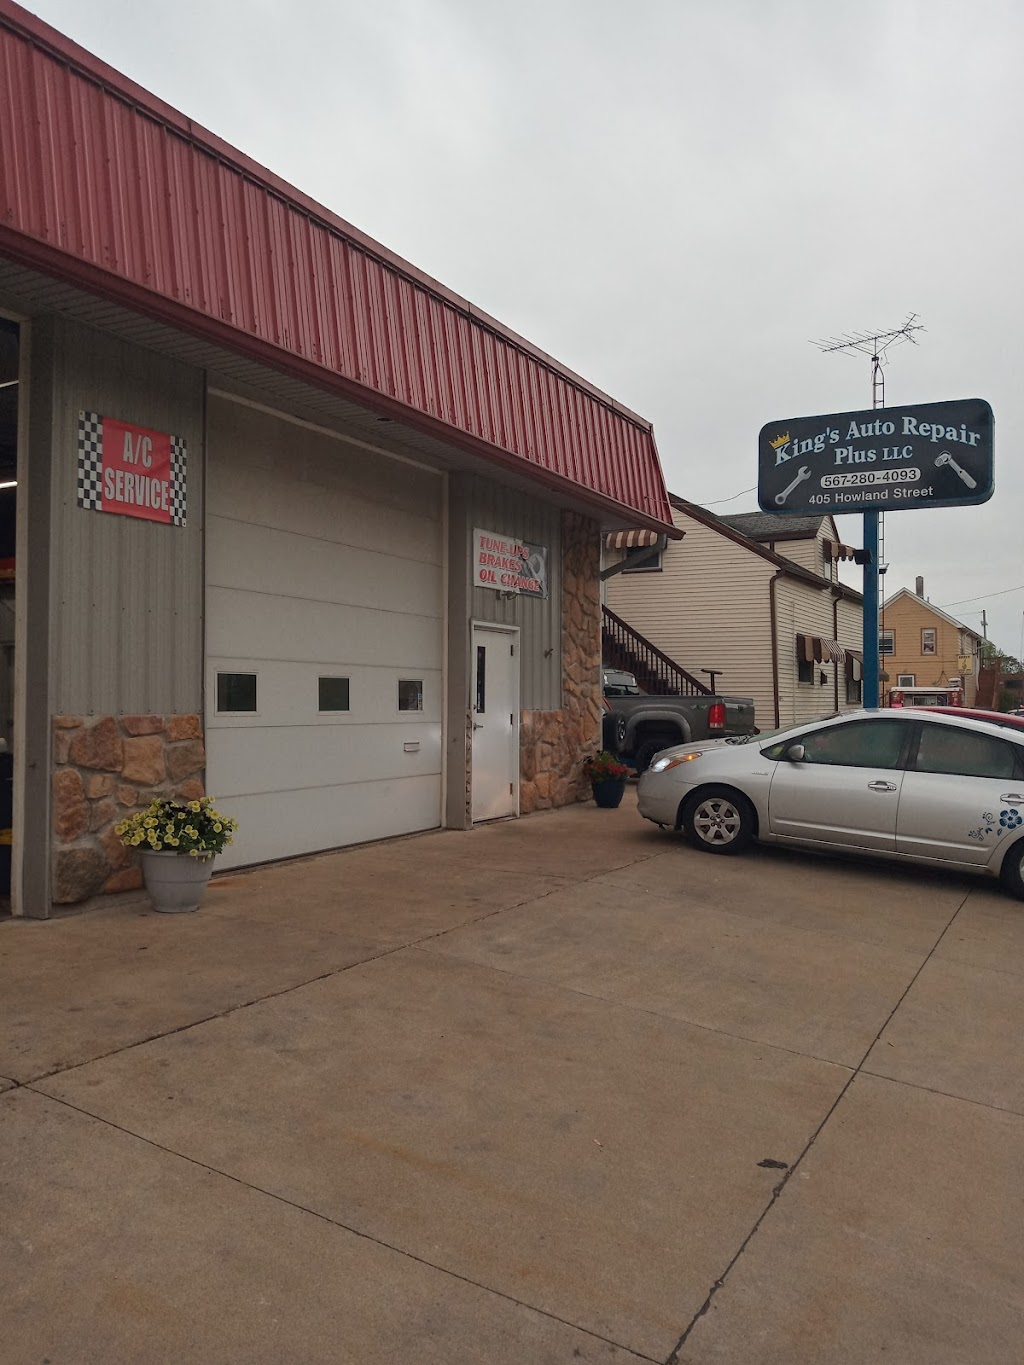 Kings Auto Repair Plus | 405 Howland St, Fremont, OH 43420, USA | Phone: (567) 280-4093